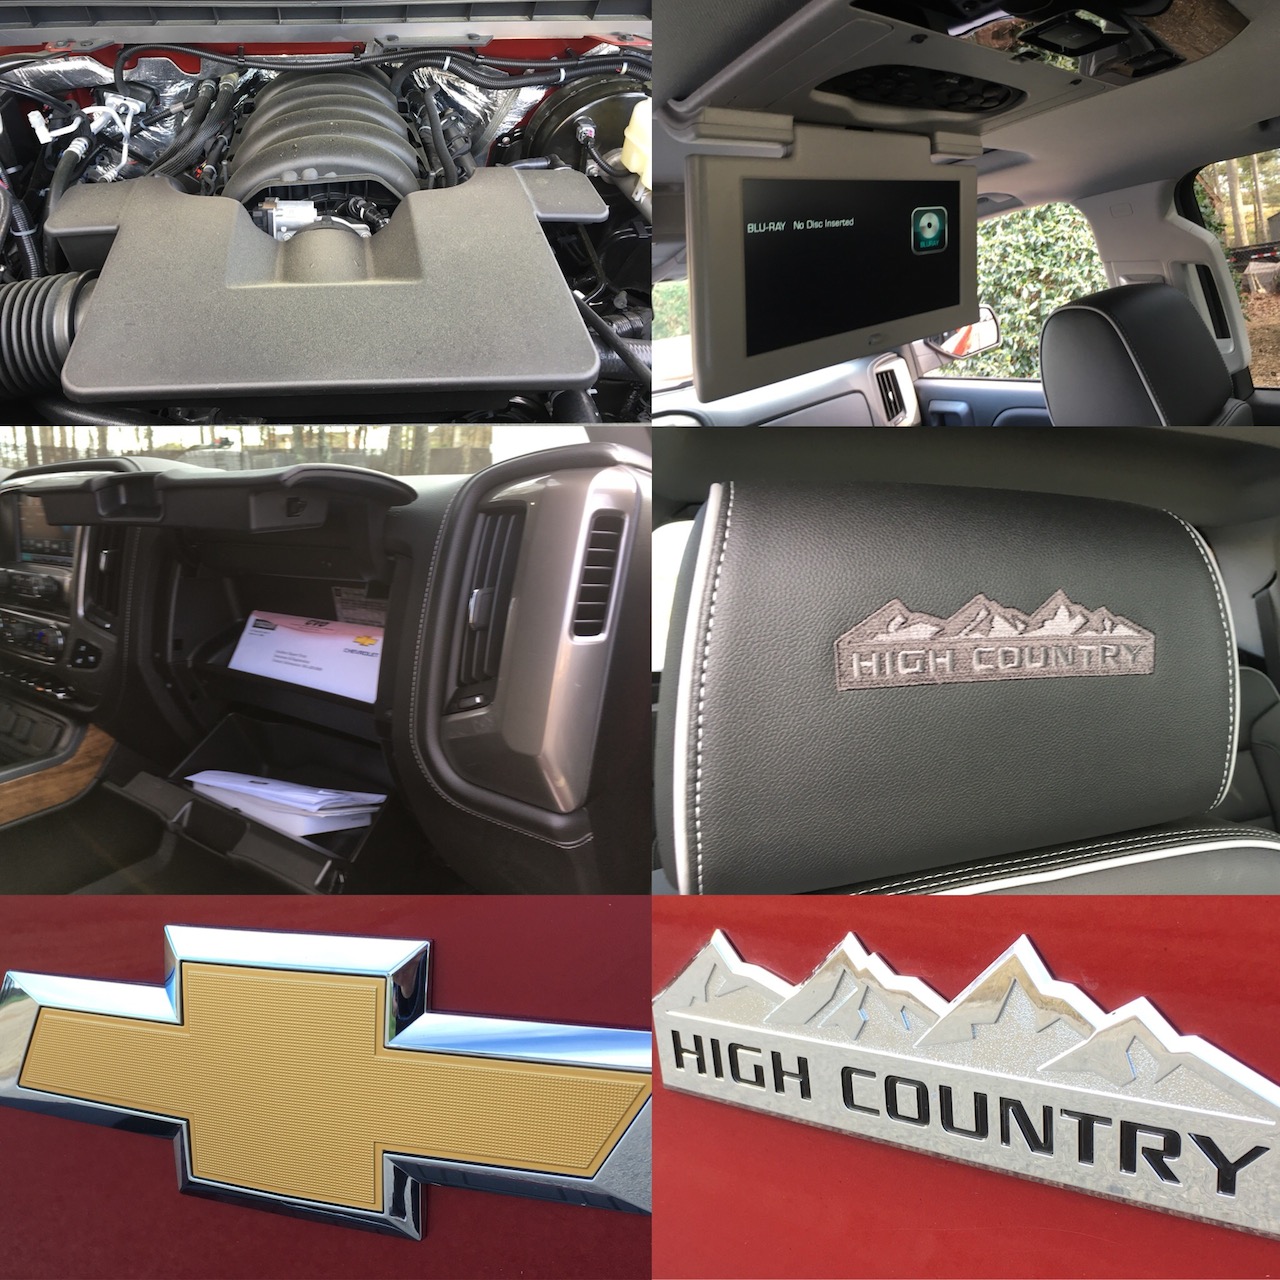 High Country Chevy Silverado Delivers A Premium Package